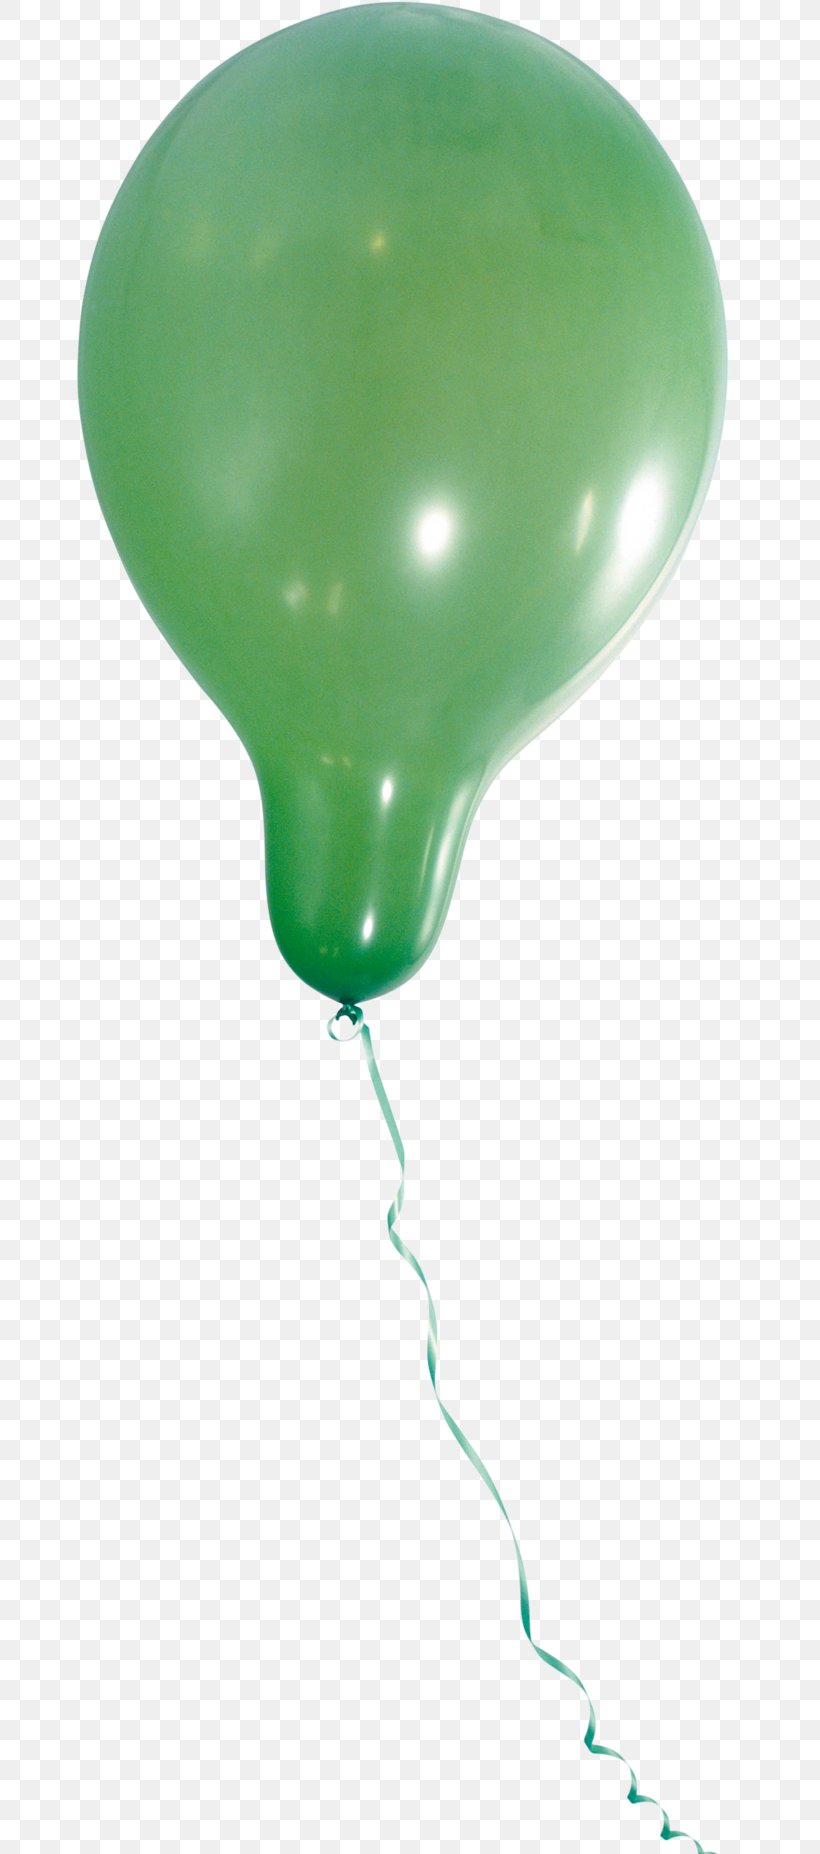 Toy Balloon, PNG, 681x1854px, Balloon, Green, Party Supply, Toy Balloon Download Free